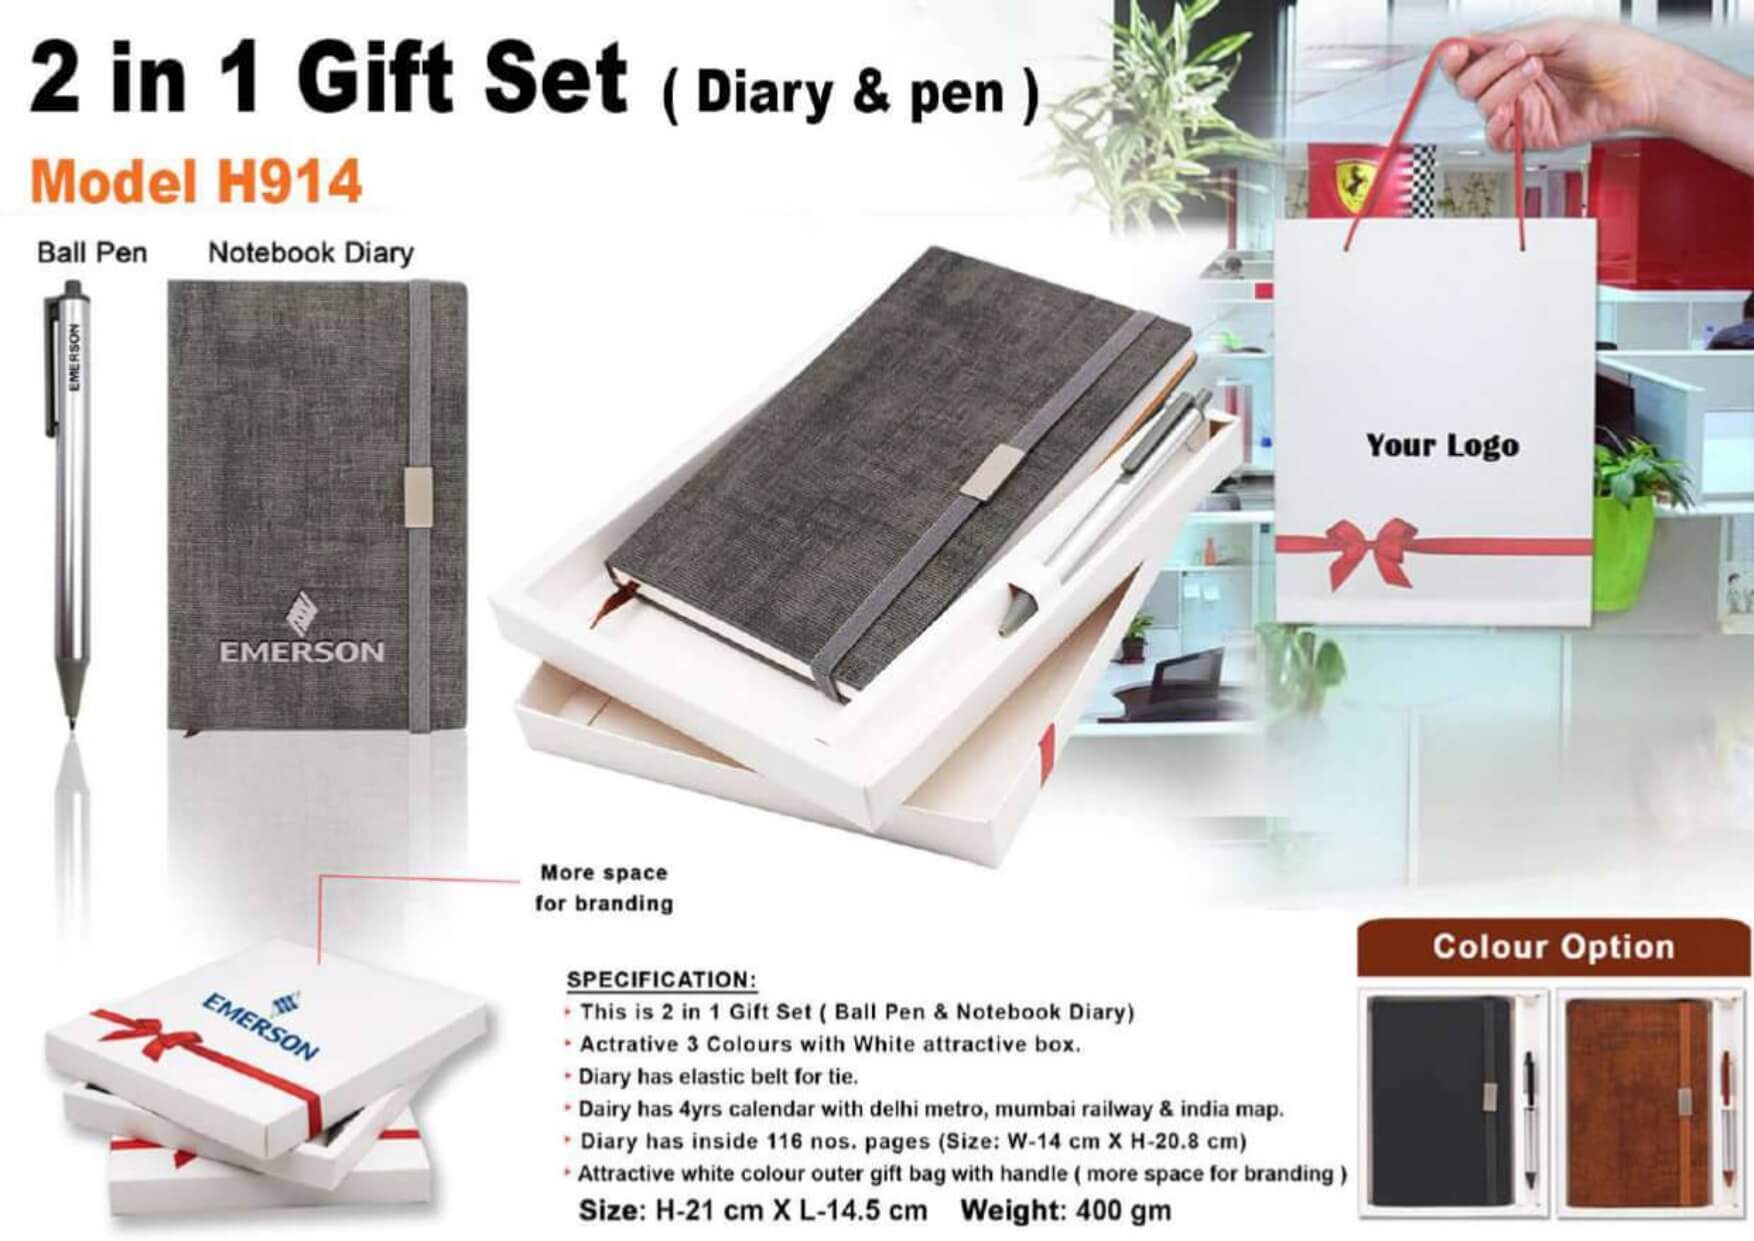 2 in 1 Gift Set Diary and Pen 914